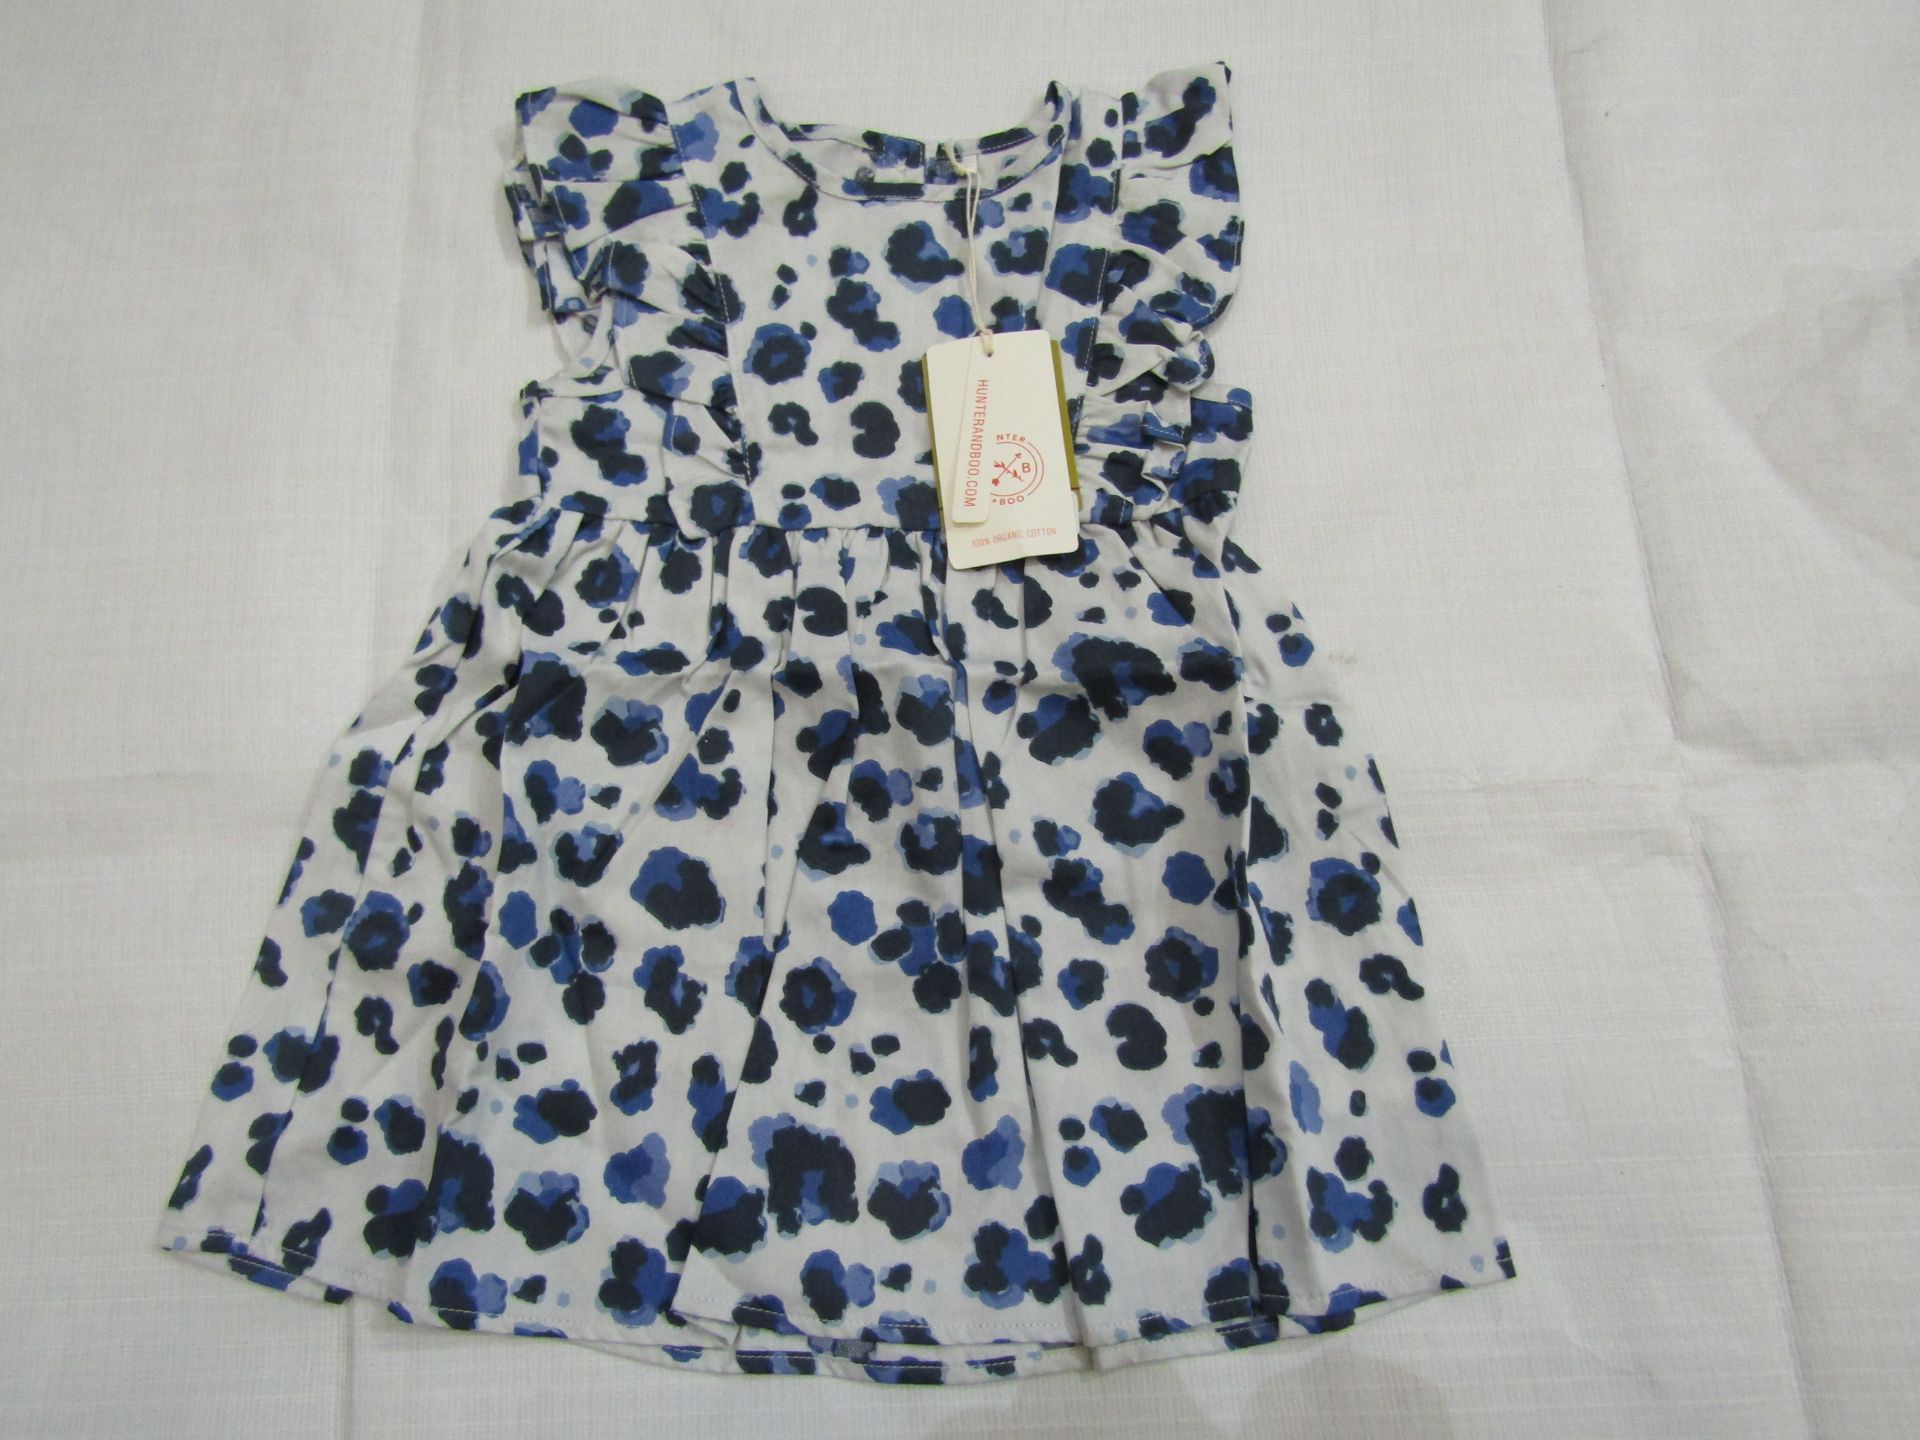 Hunter & Boo Yala Blue Frilled Dress Aged 12-24 Months New & Packaged RRP £25